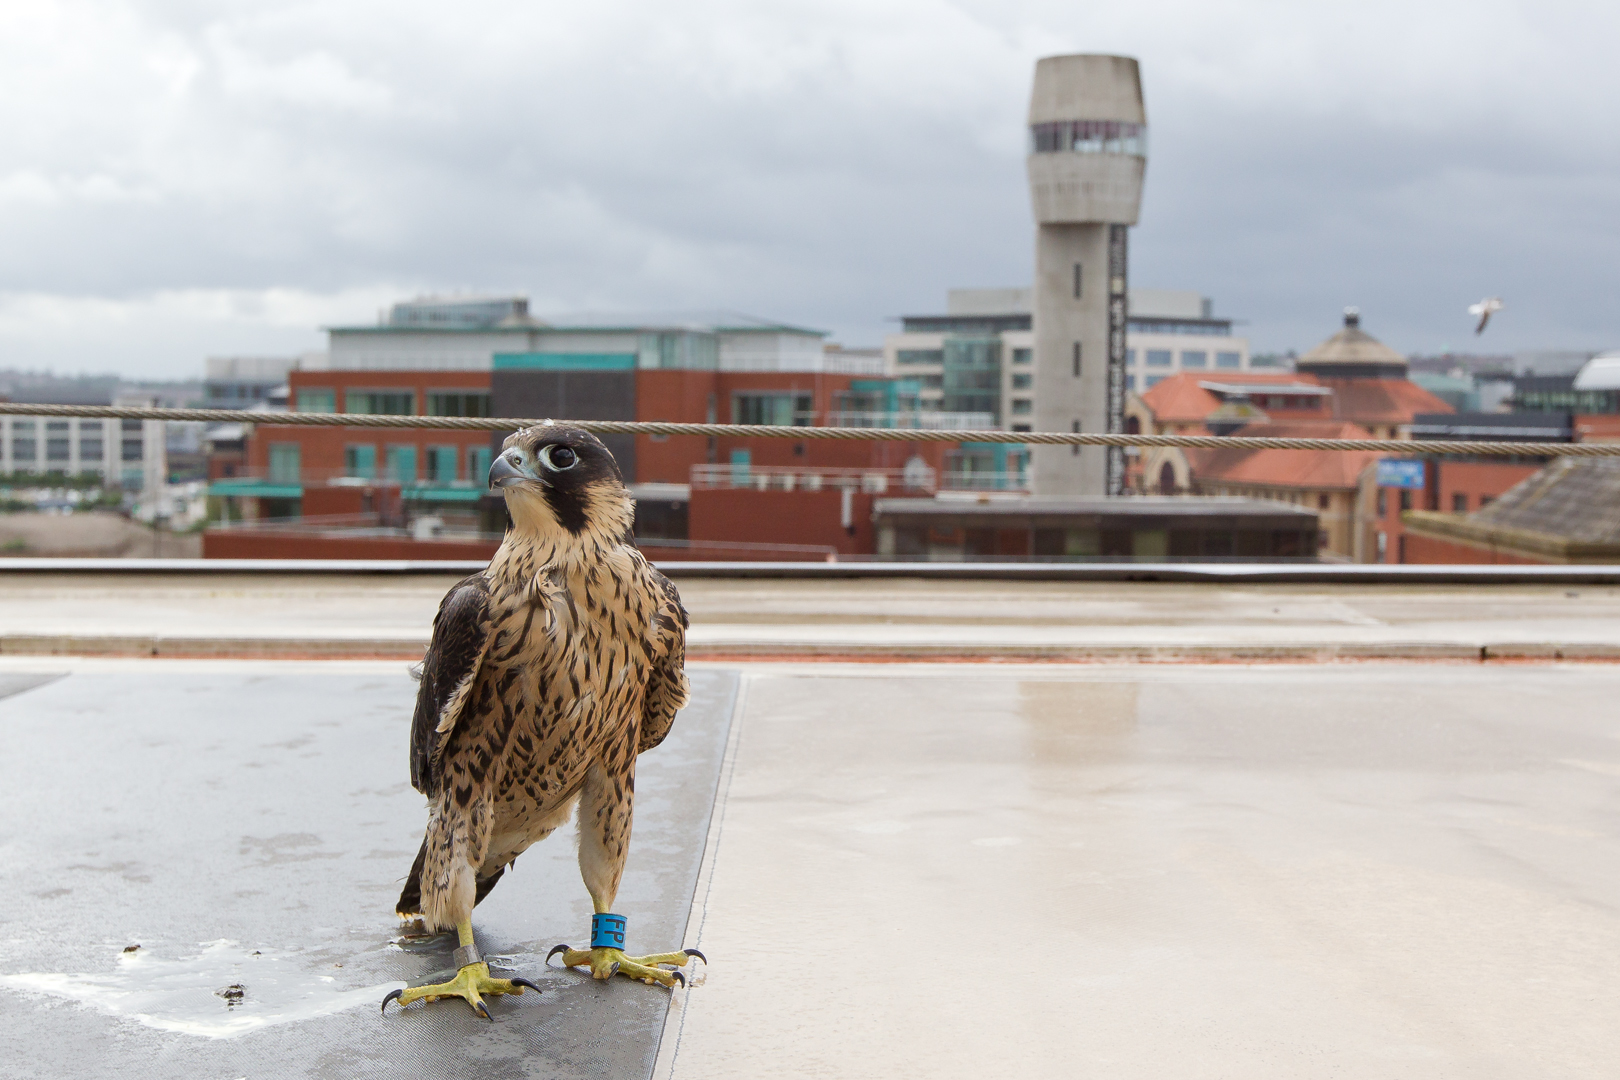  A juvenile peregrine falcon preparing to fly following a near drowning experience.&nbsp; 